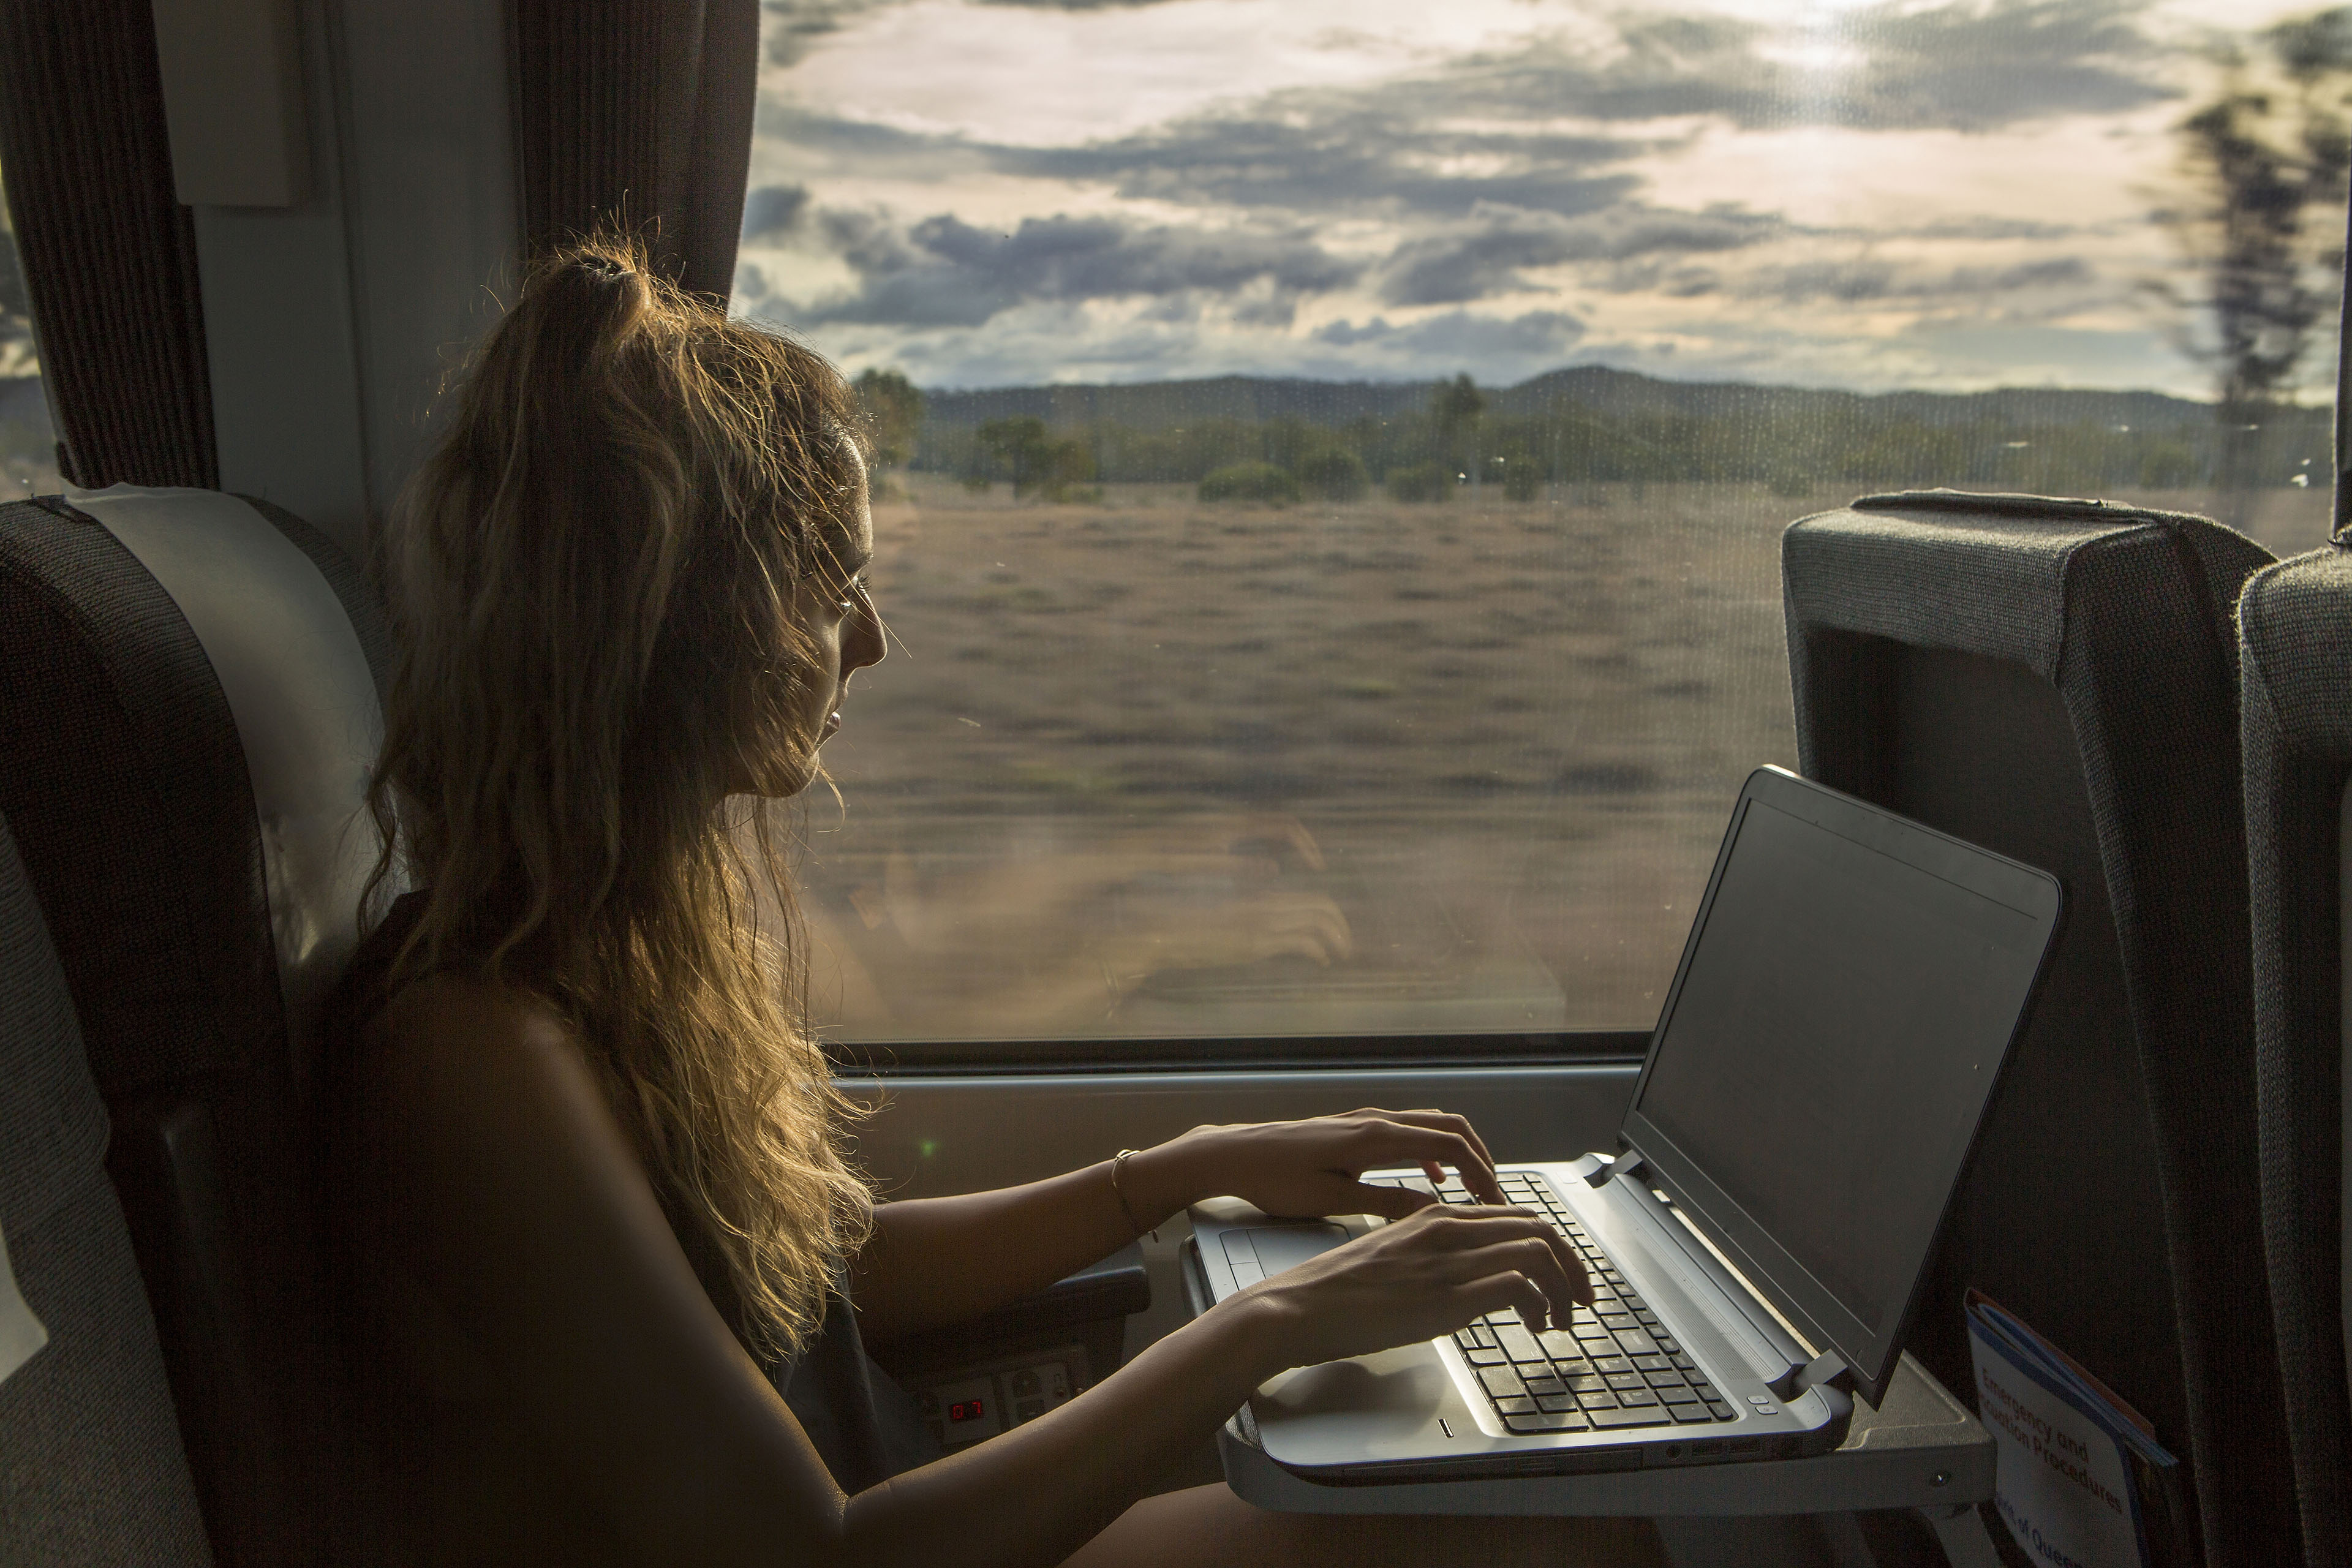 A woman working on her laptop while traveling on a train